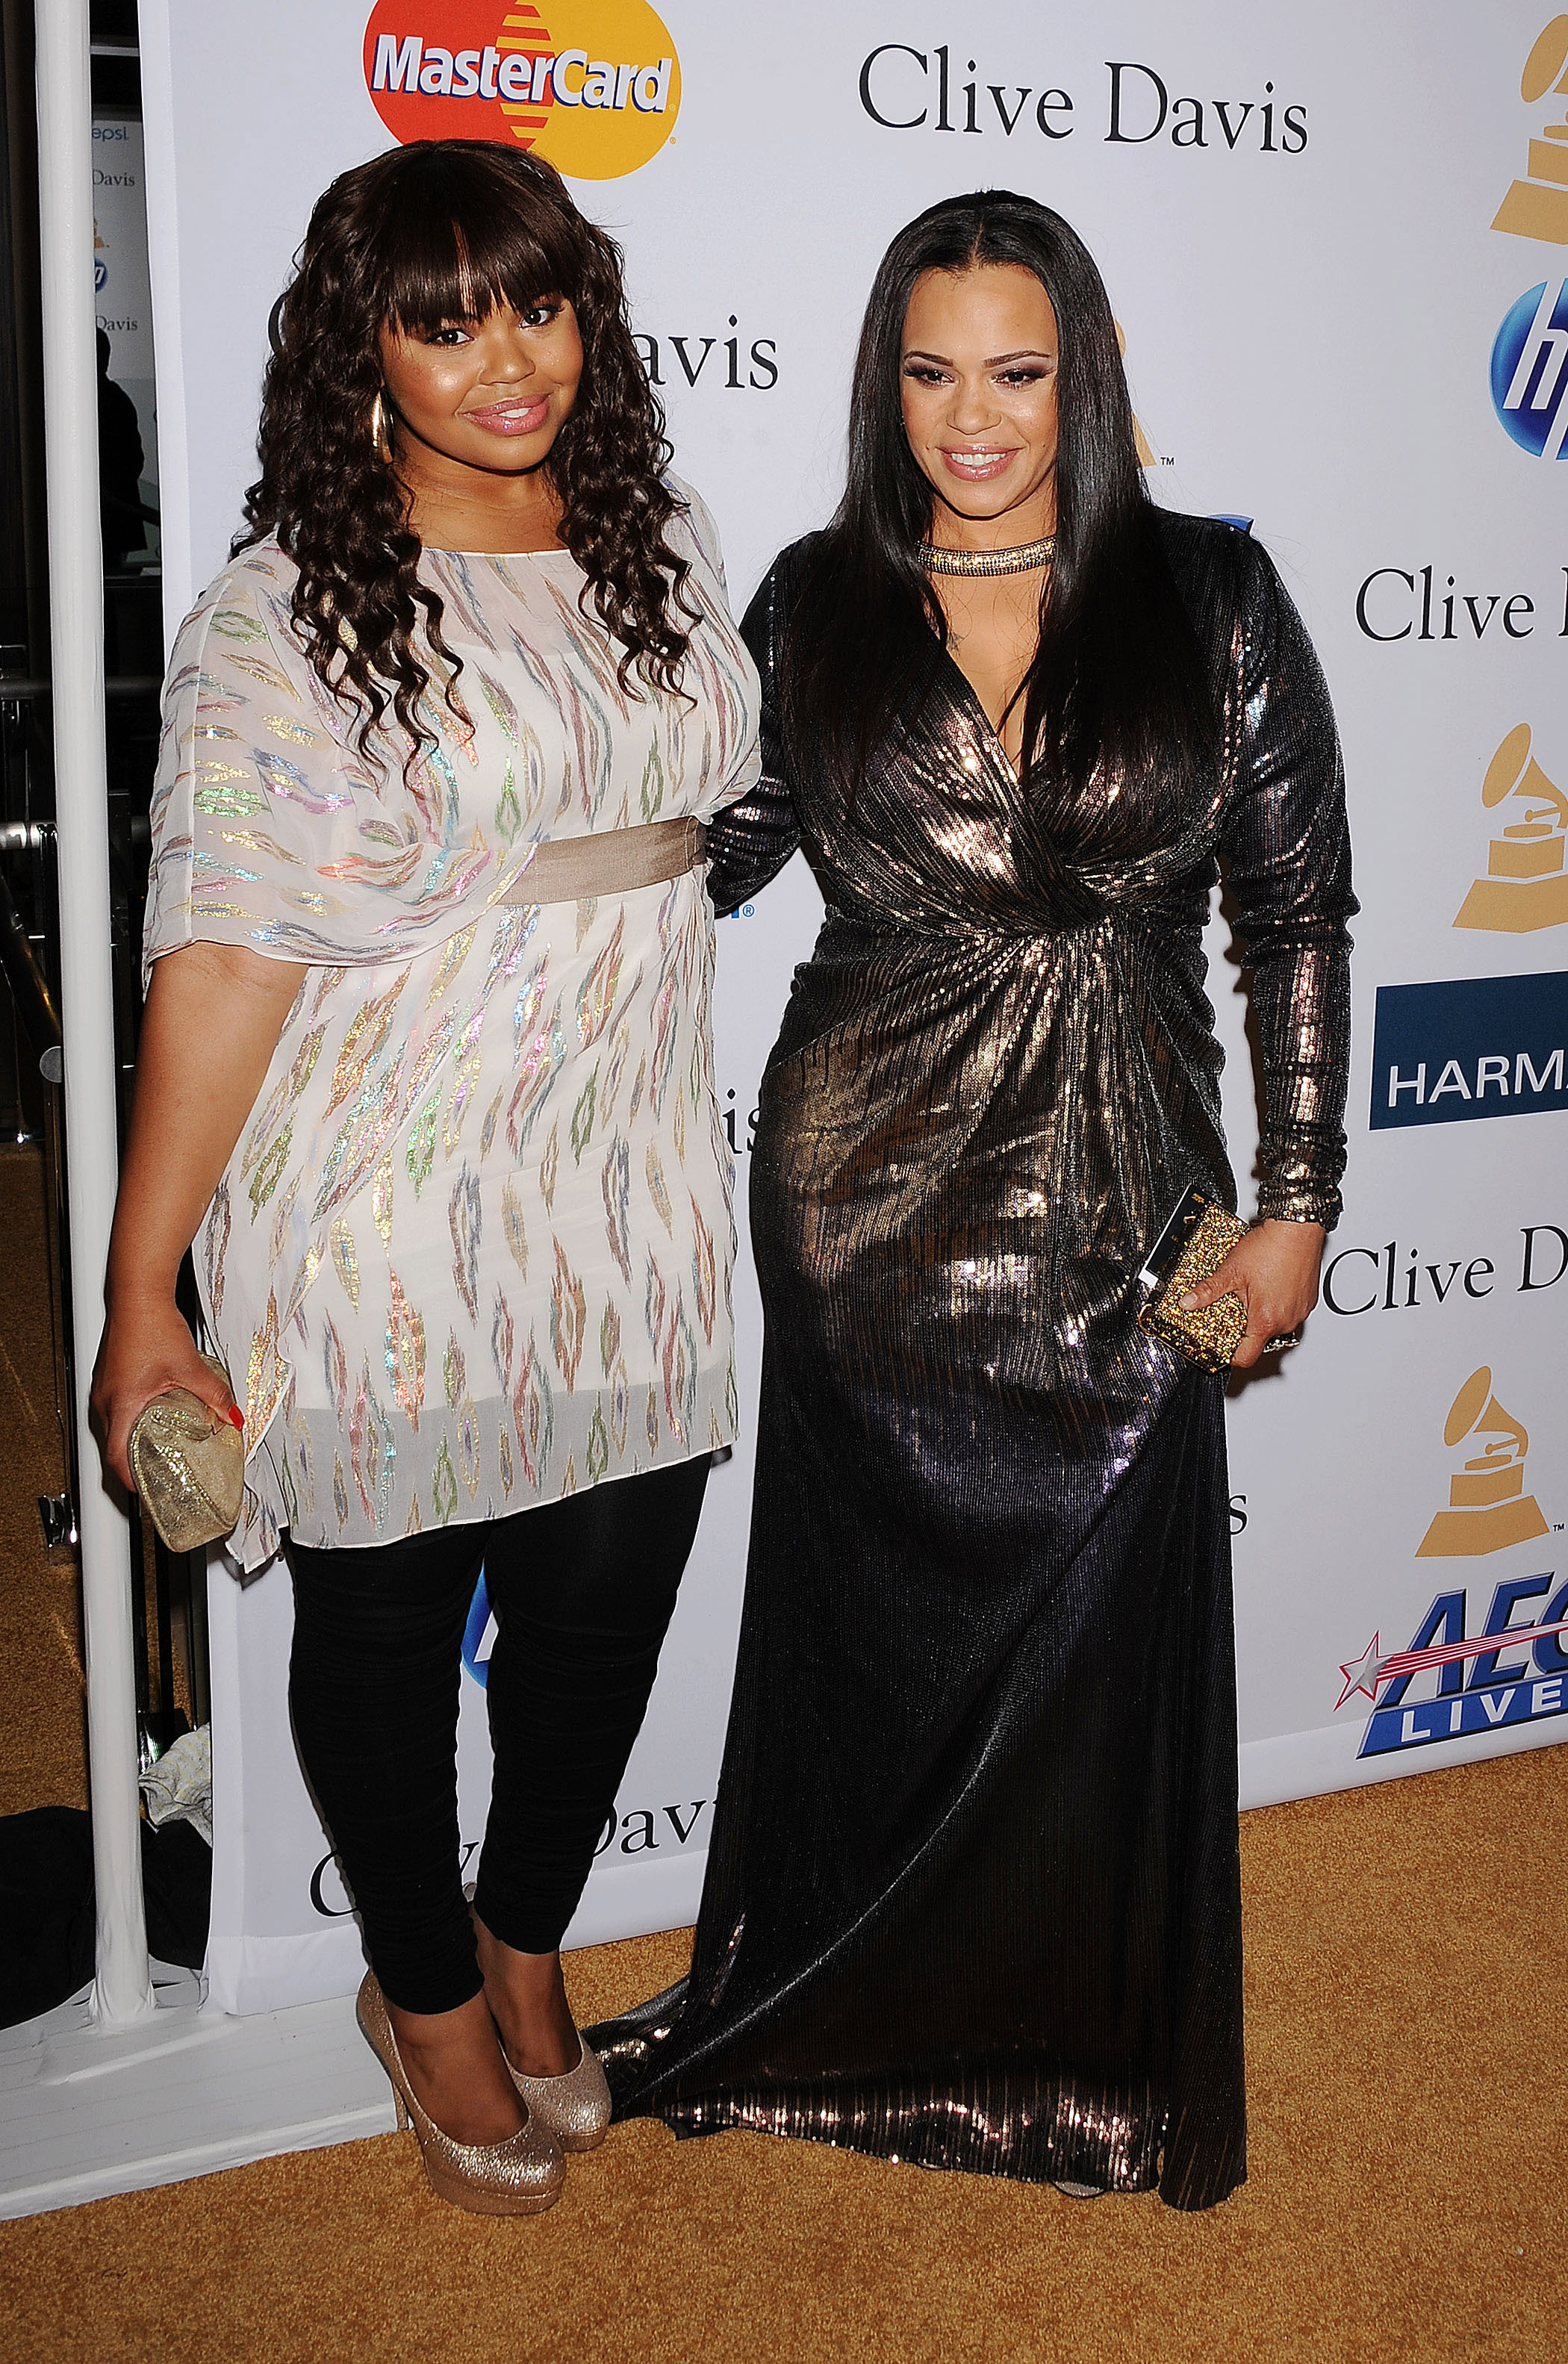 Chyna Tahjere Griffin and Faith Evans at the 2011 Pre-Grammy Gala on February 12, 2011, in Beverly Hills, California. | Source: Getty Images